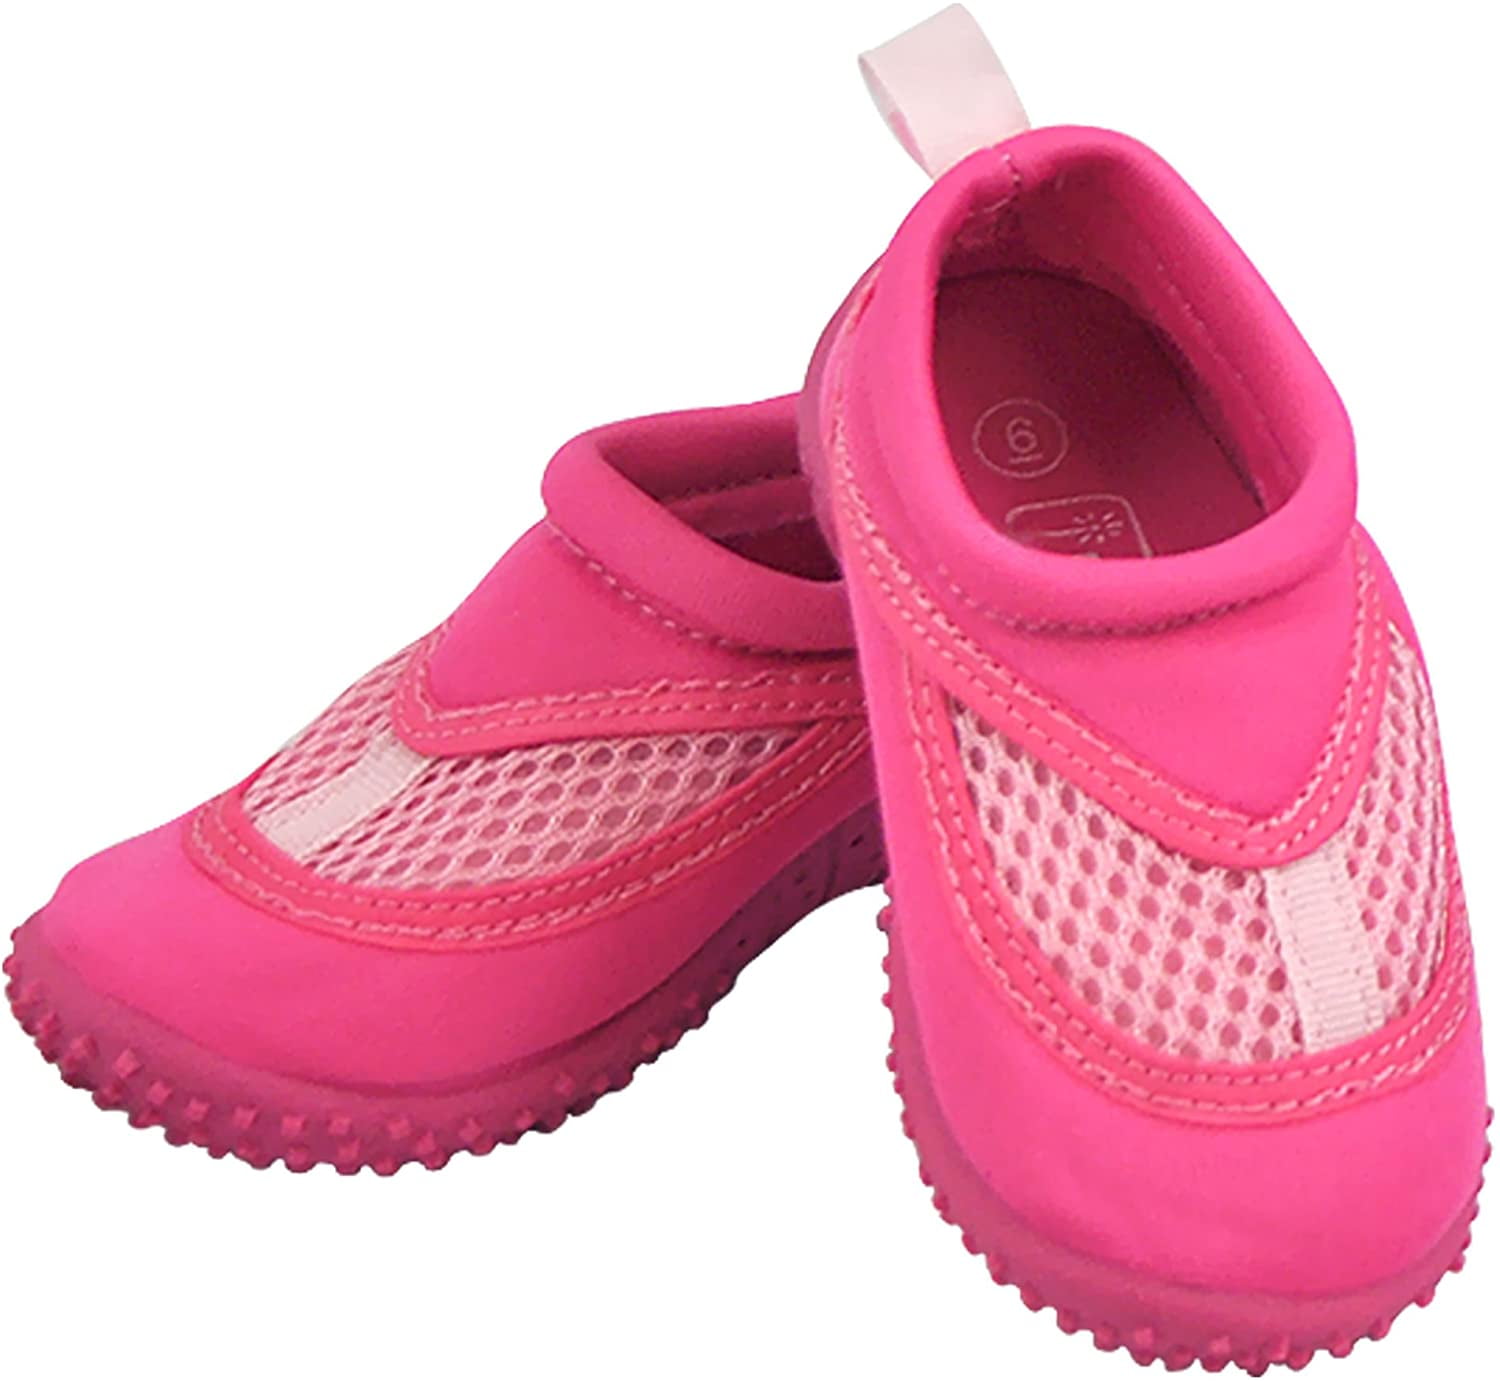 Unisex Sneakers Swimming Shoes Quick-Drying Aqua Shoes and children Water Shoes 